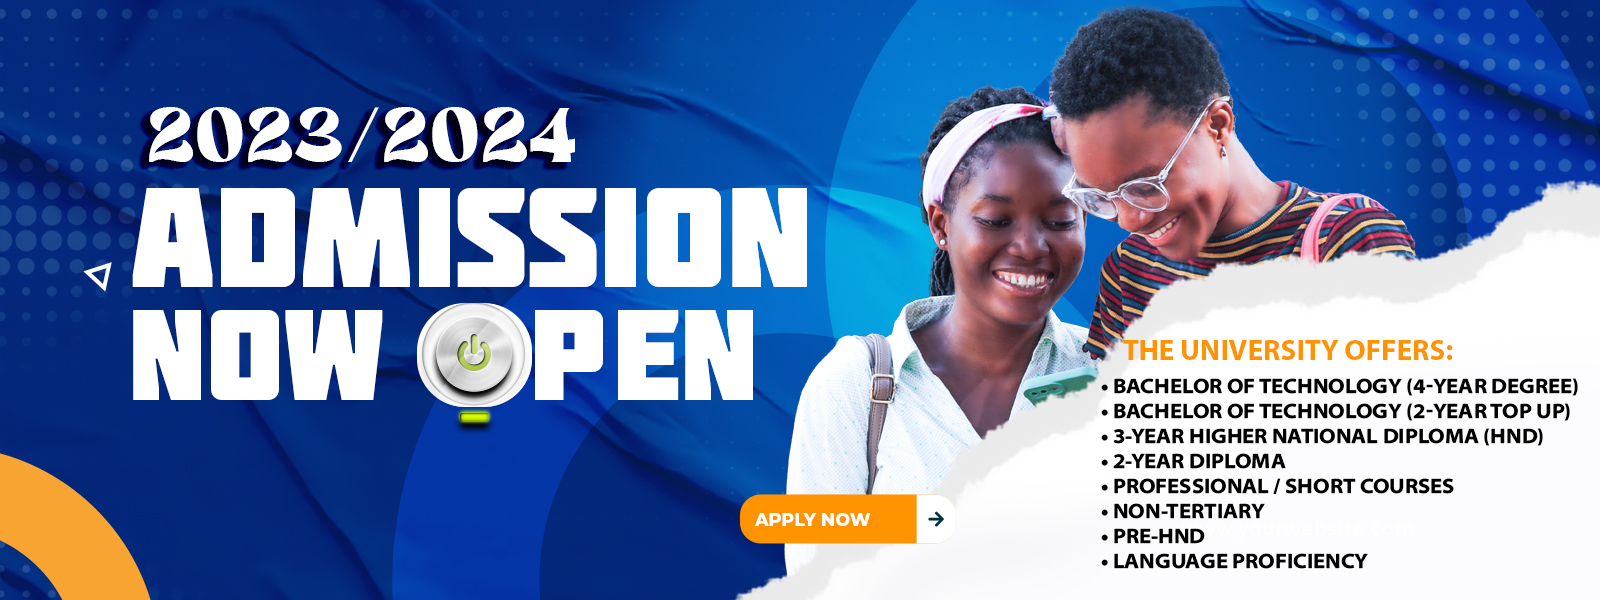 admission now open 1600x600px (1)